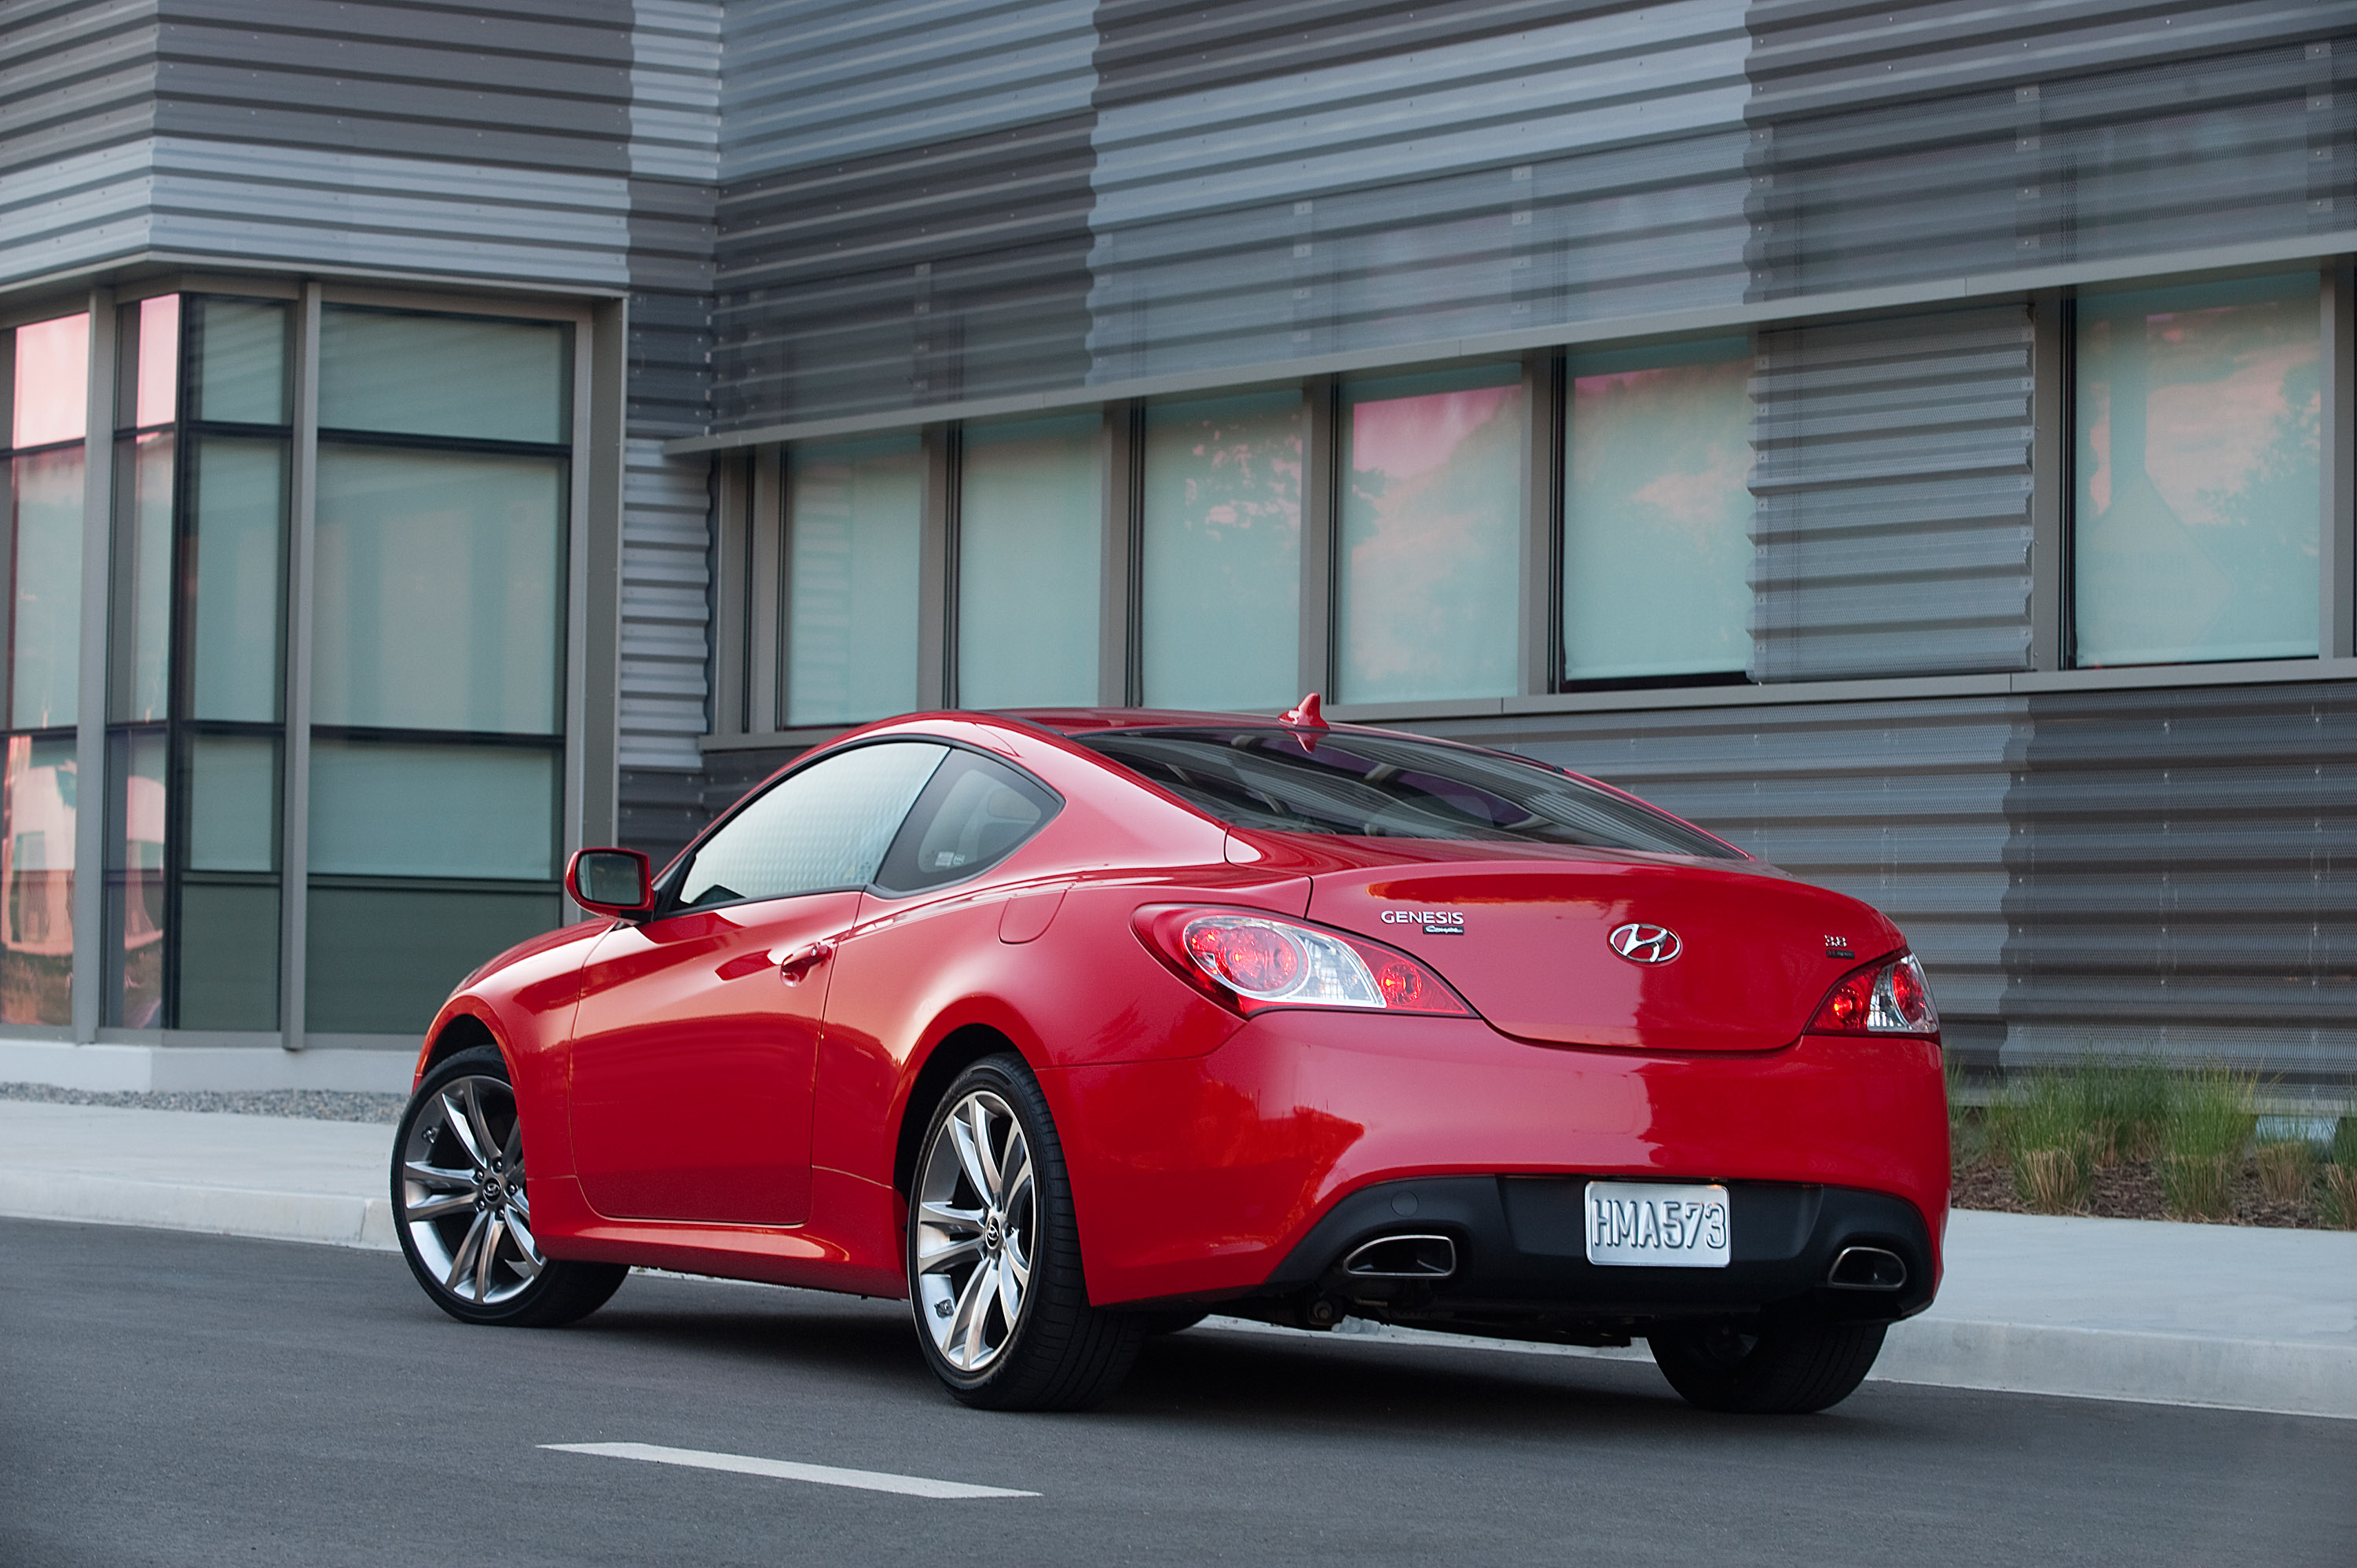 2011 Hyundai Genesis Coupe 3.8 RSpec priced for the US